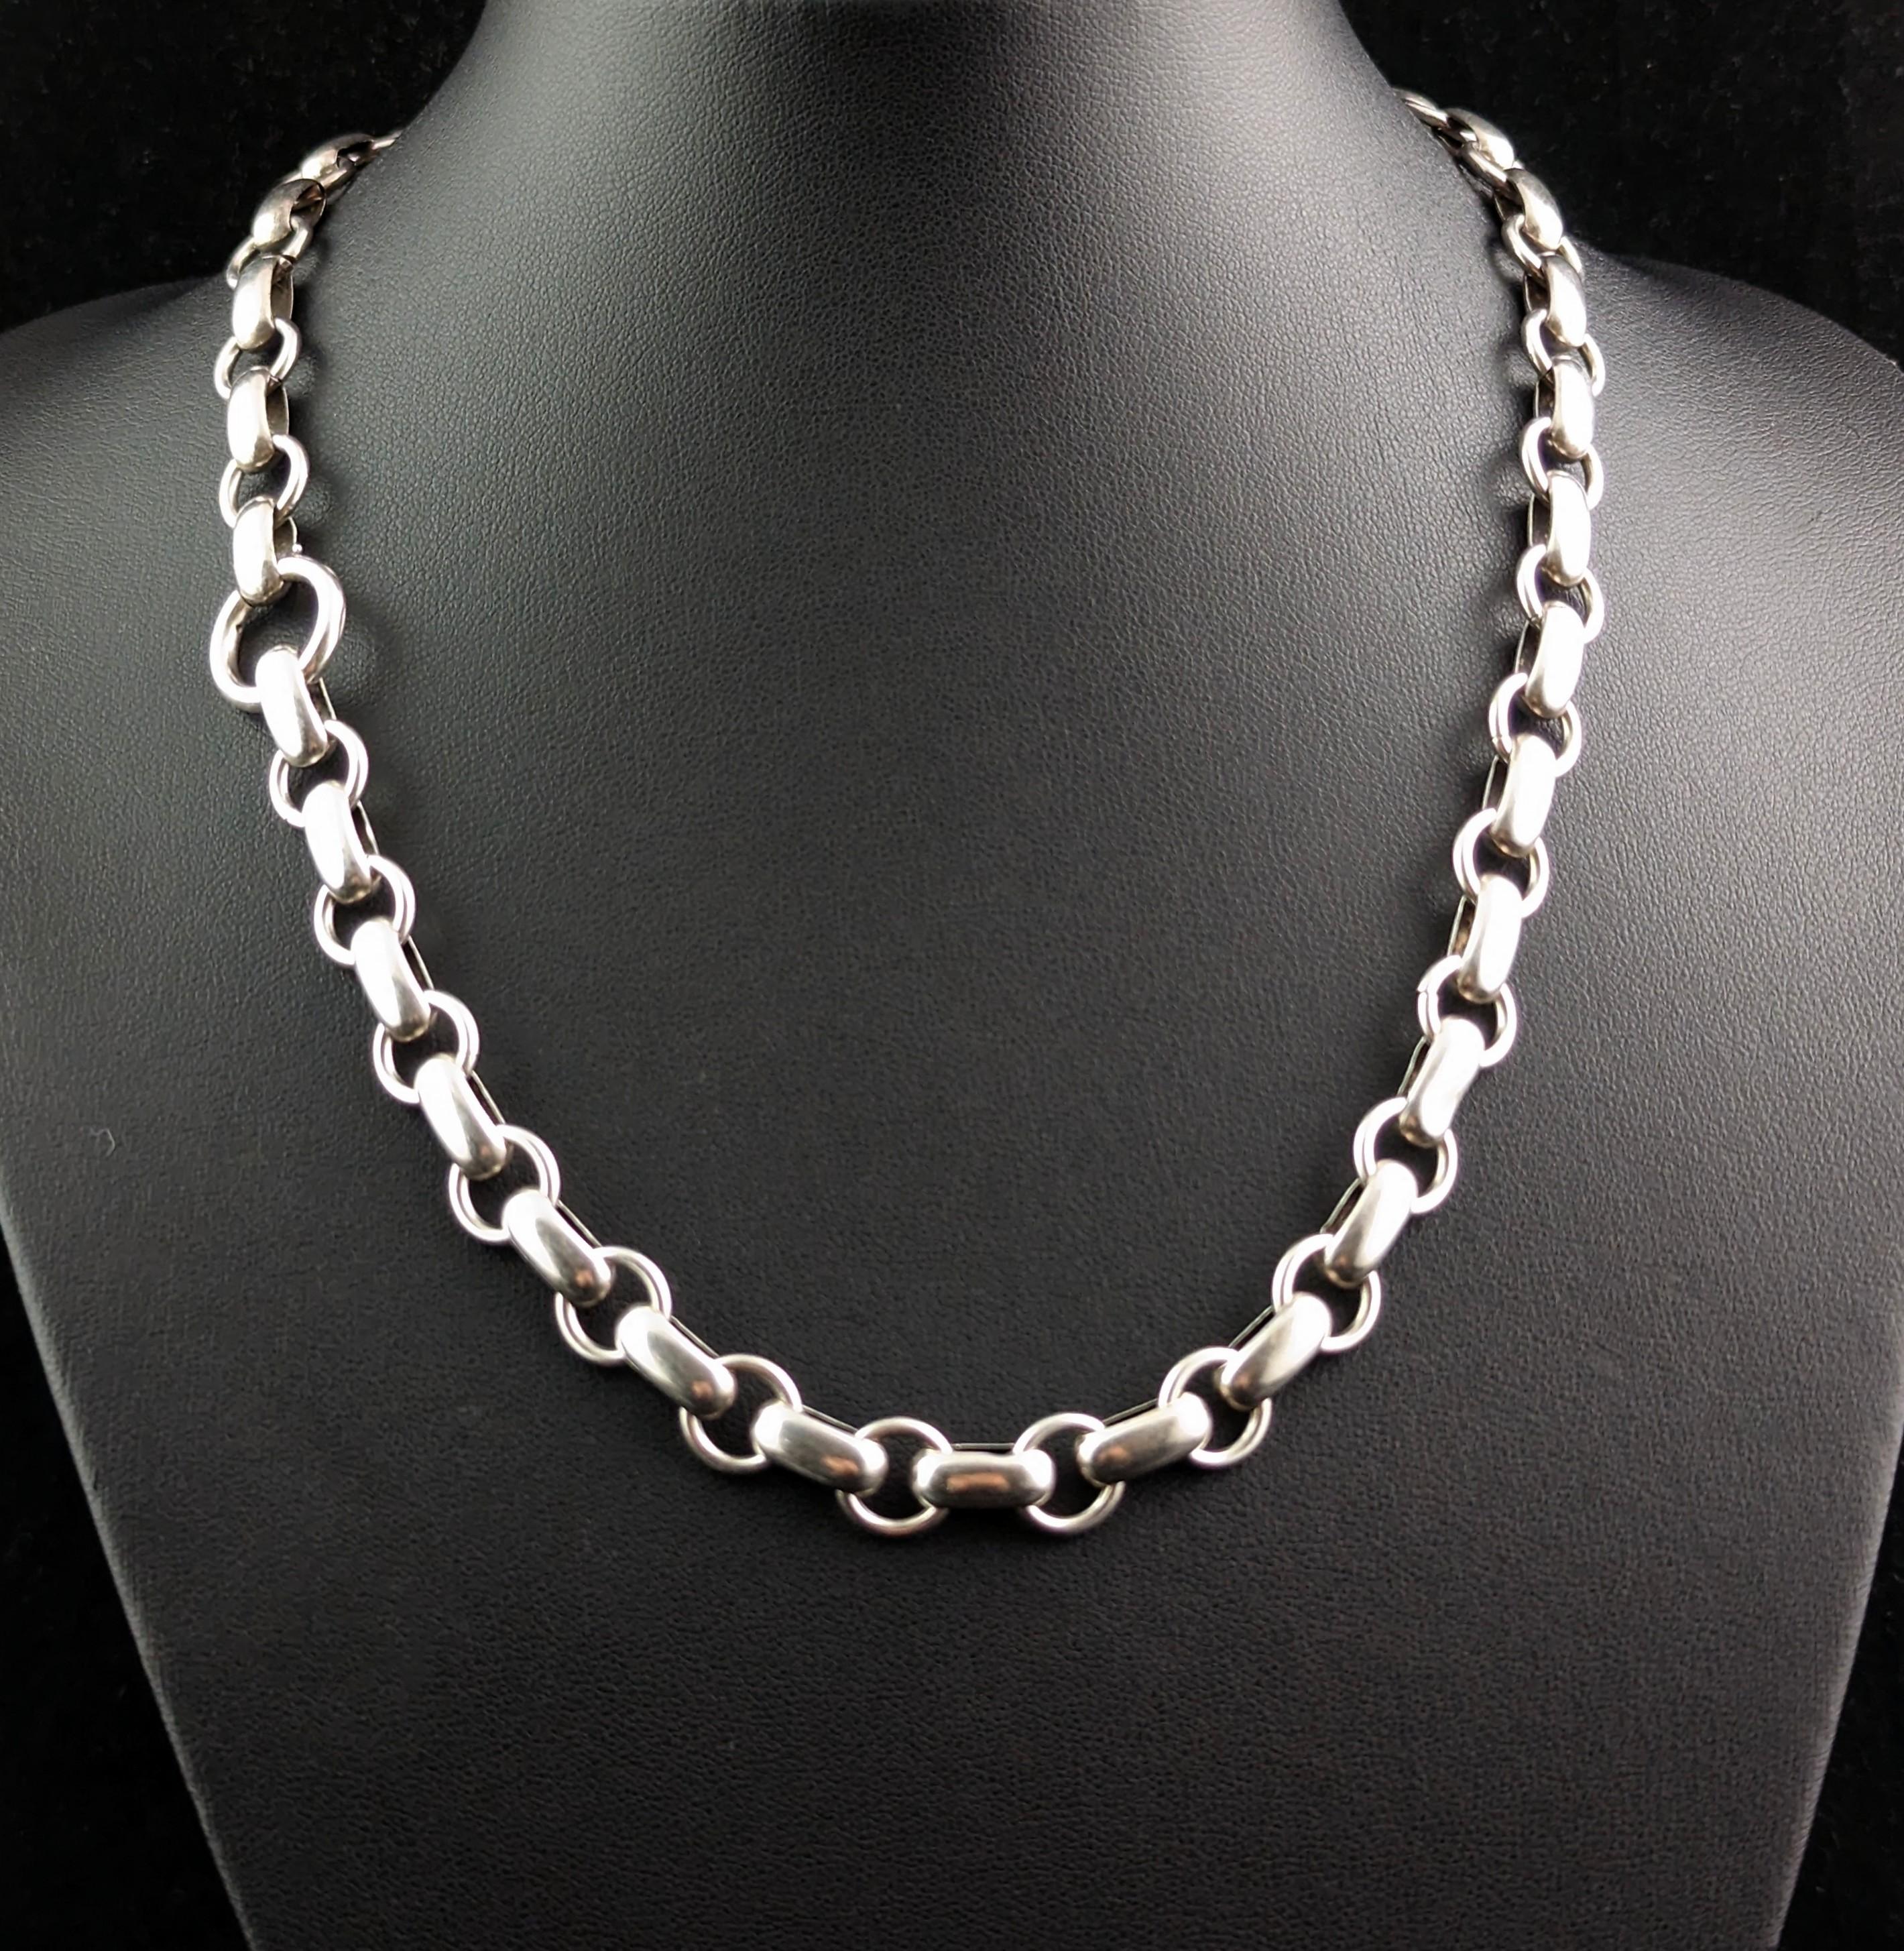 No antique jewellery collection is complete without an antique silver book chain necklace.

These are such versatile pieces of jewellery and are as wearable today as they were back in the Victorian era, rising to popularity in the Aesthetic era